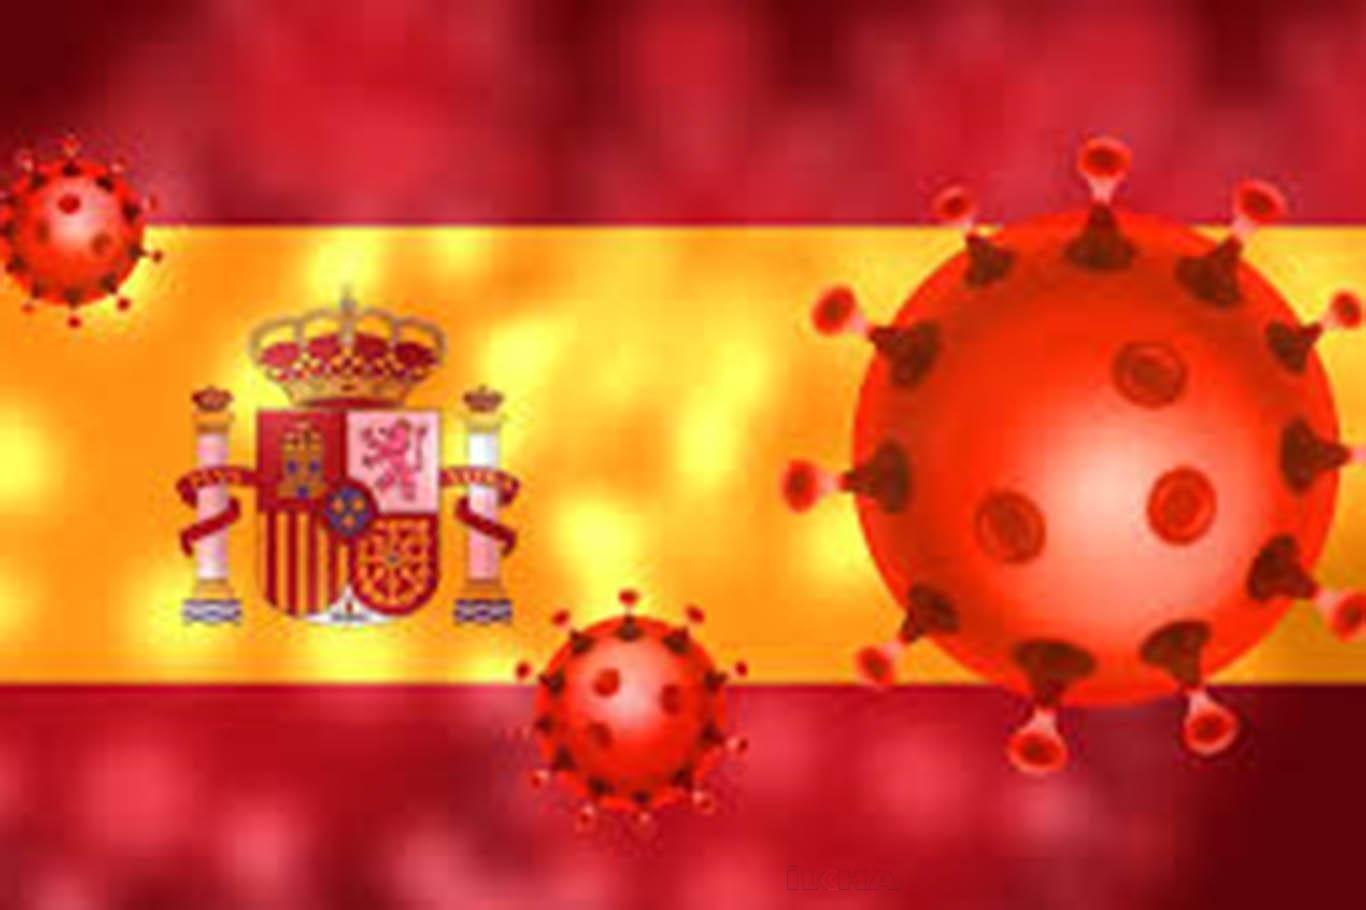 The number of coronavirus cases reaches 239,228 in Spain